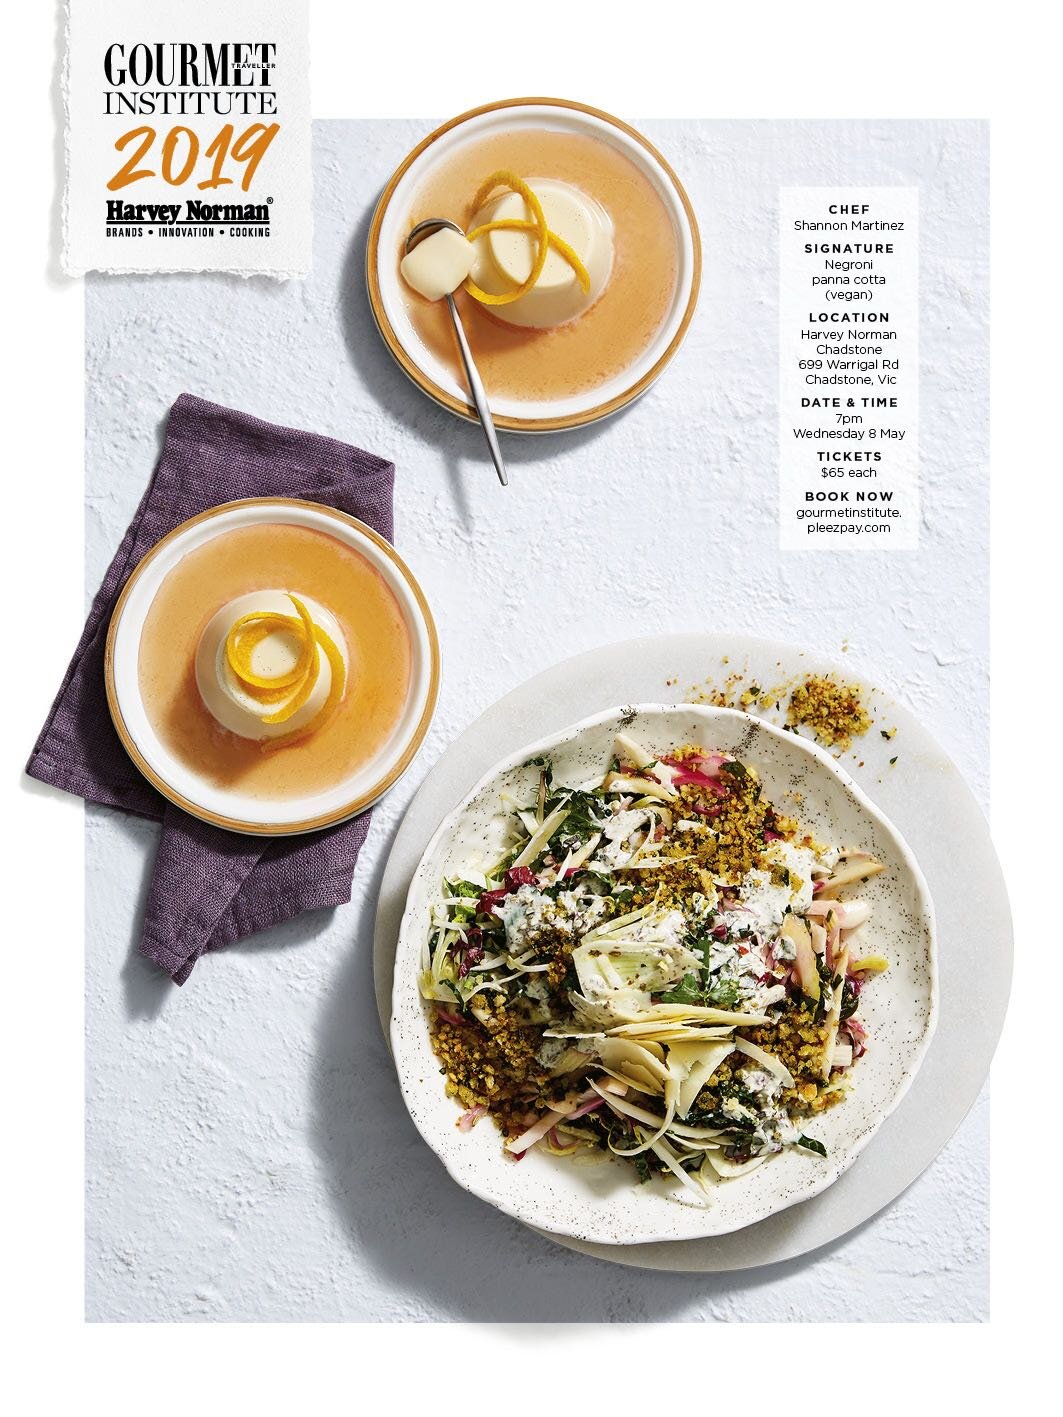  Vegan Ceasar Salad and pannacotta recipe by Shannon Martinez. Food photography art directed by Alecia Green for Harvey Norman Gourmet Institute 2019 in partnership with Gourmet Traveller magazine. 